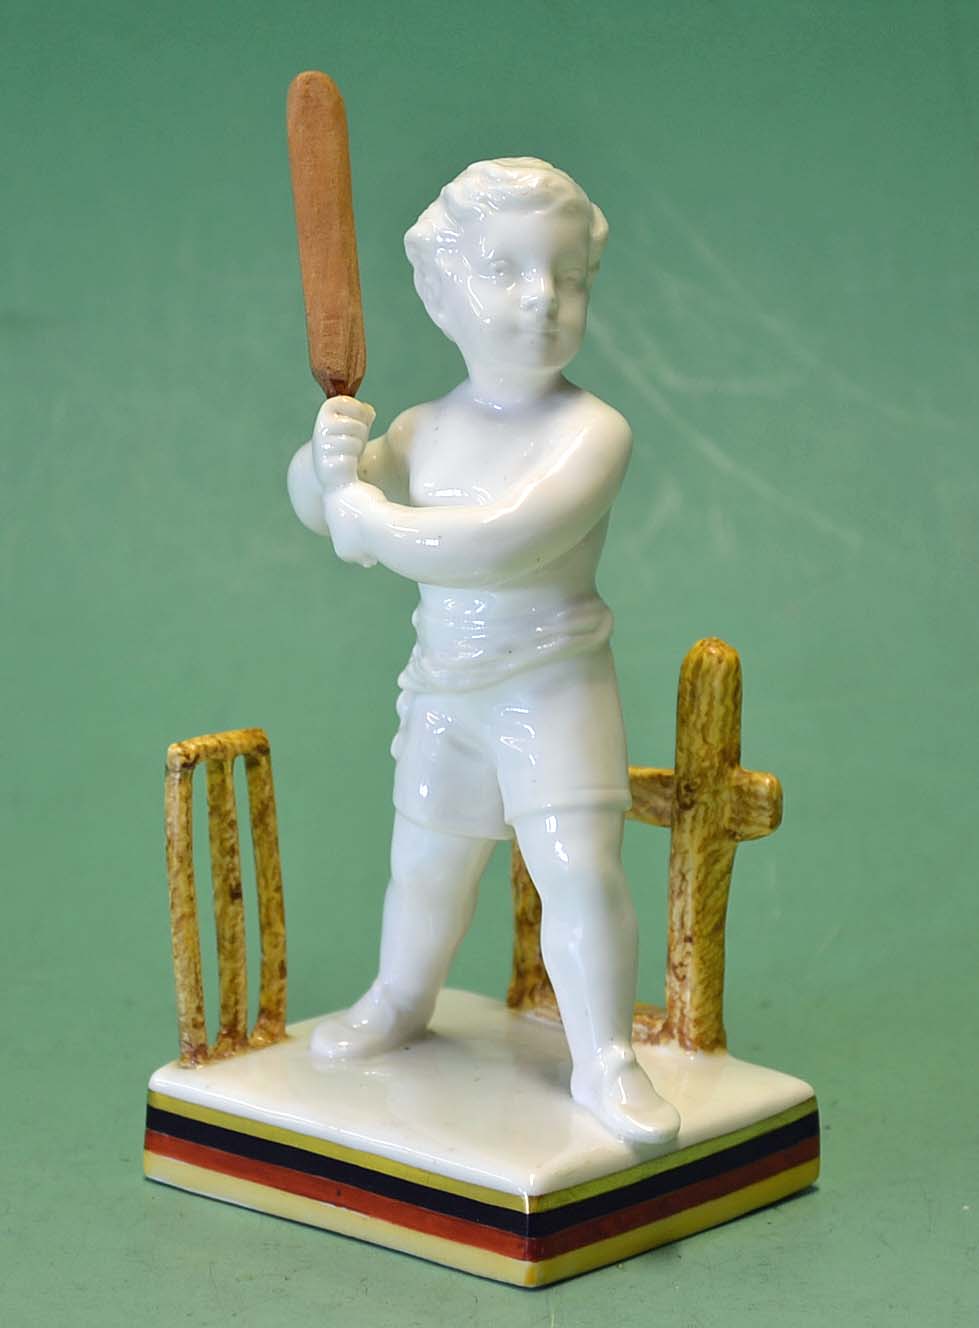 Scarce Minton porcelain cricket figure c1885 – comprising a white figure of a young boy holding a